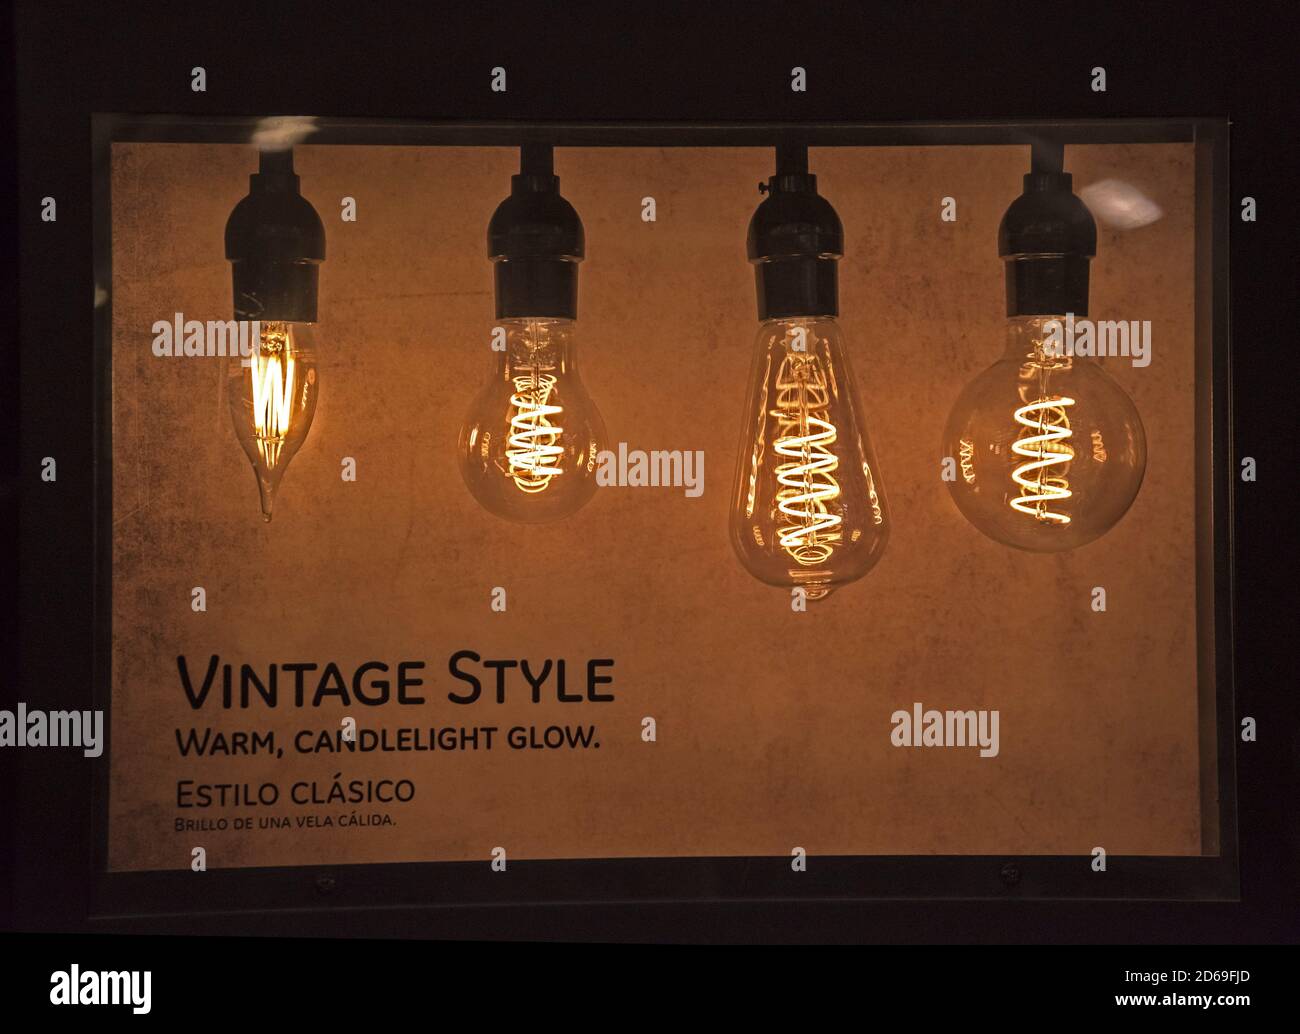 Vintage style light bulbs on display in a home improvement store in Florida. Stock Photo